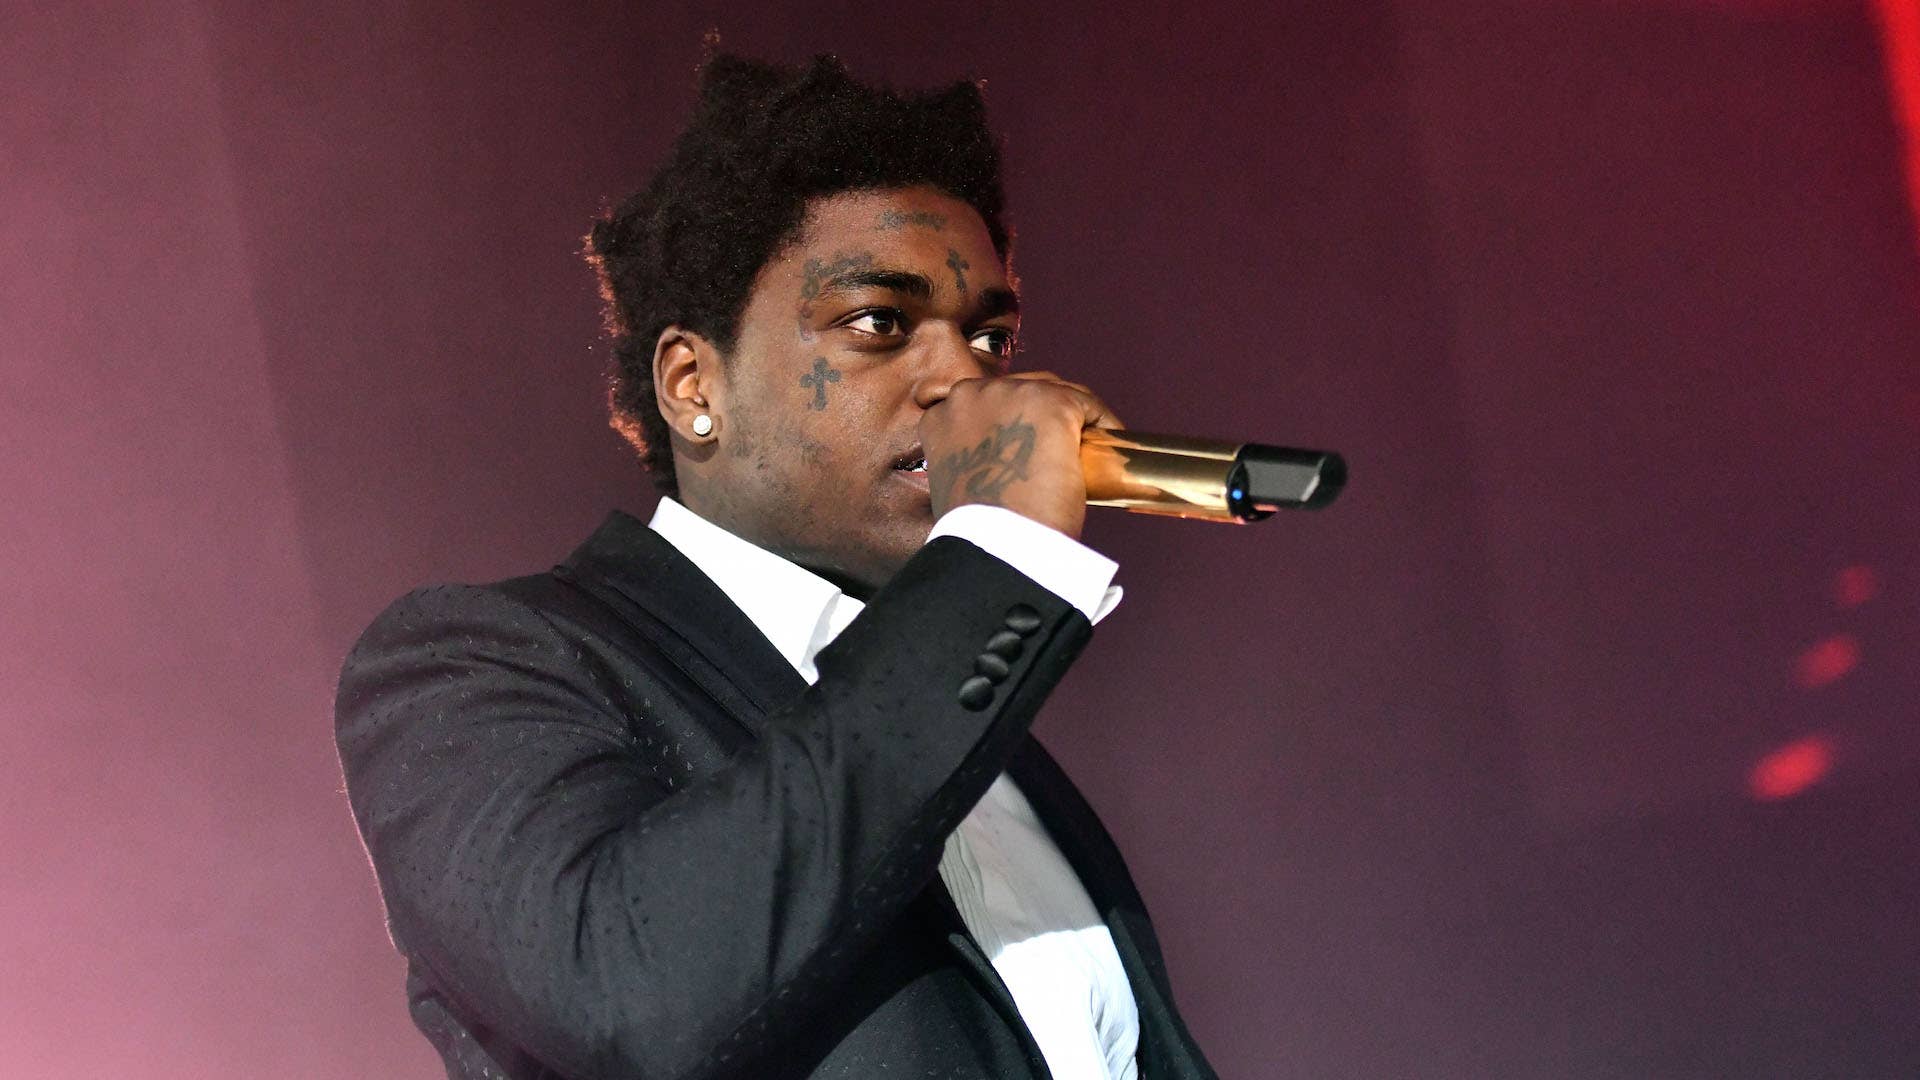 Kodak Black performs onstage during the 'Dying to Live' tour